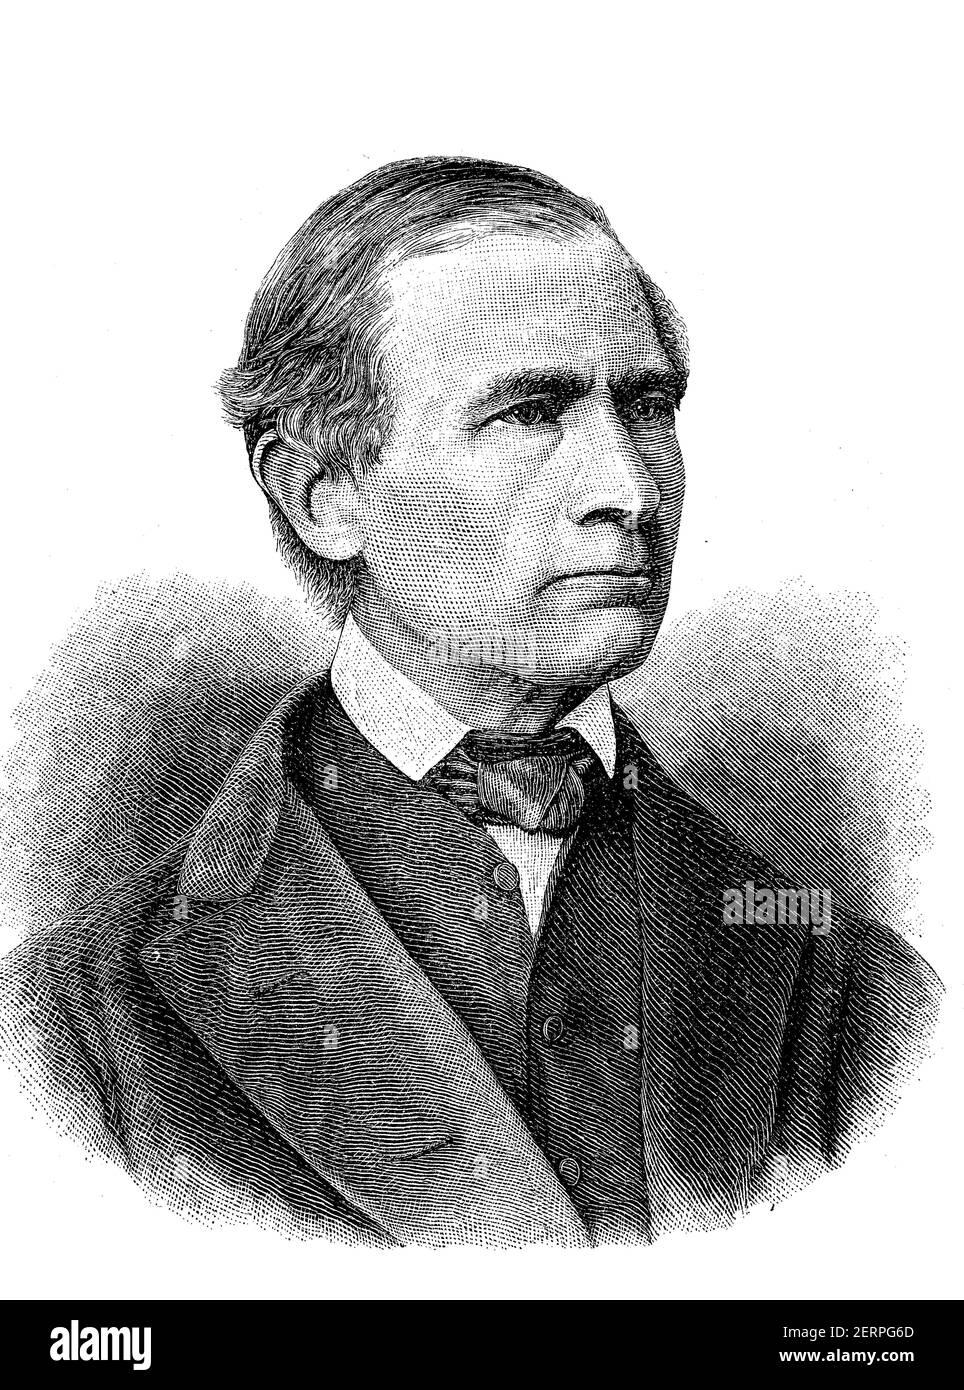 Johann Gottfried Galle, June 9, 1812- July 10, 1910, was a German astronomer, climatologist, and university lecturer. He was involved in the discovery Stock Photo